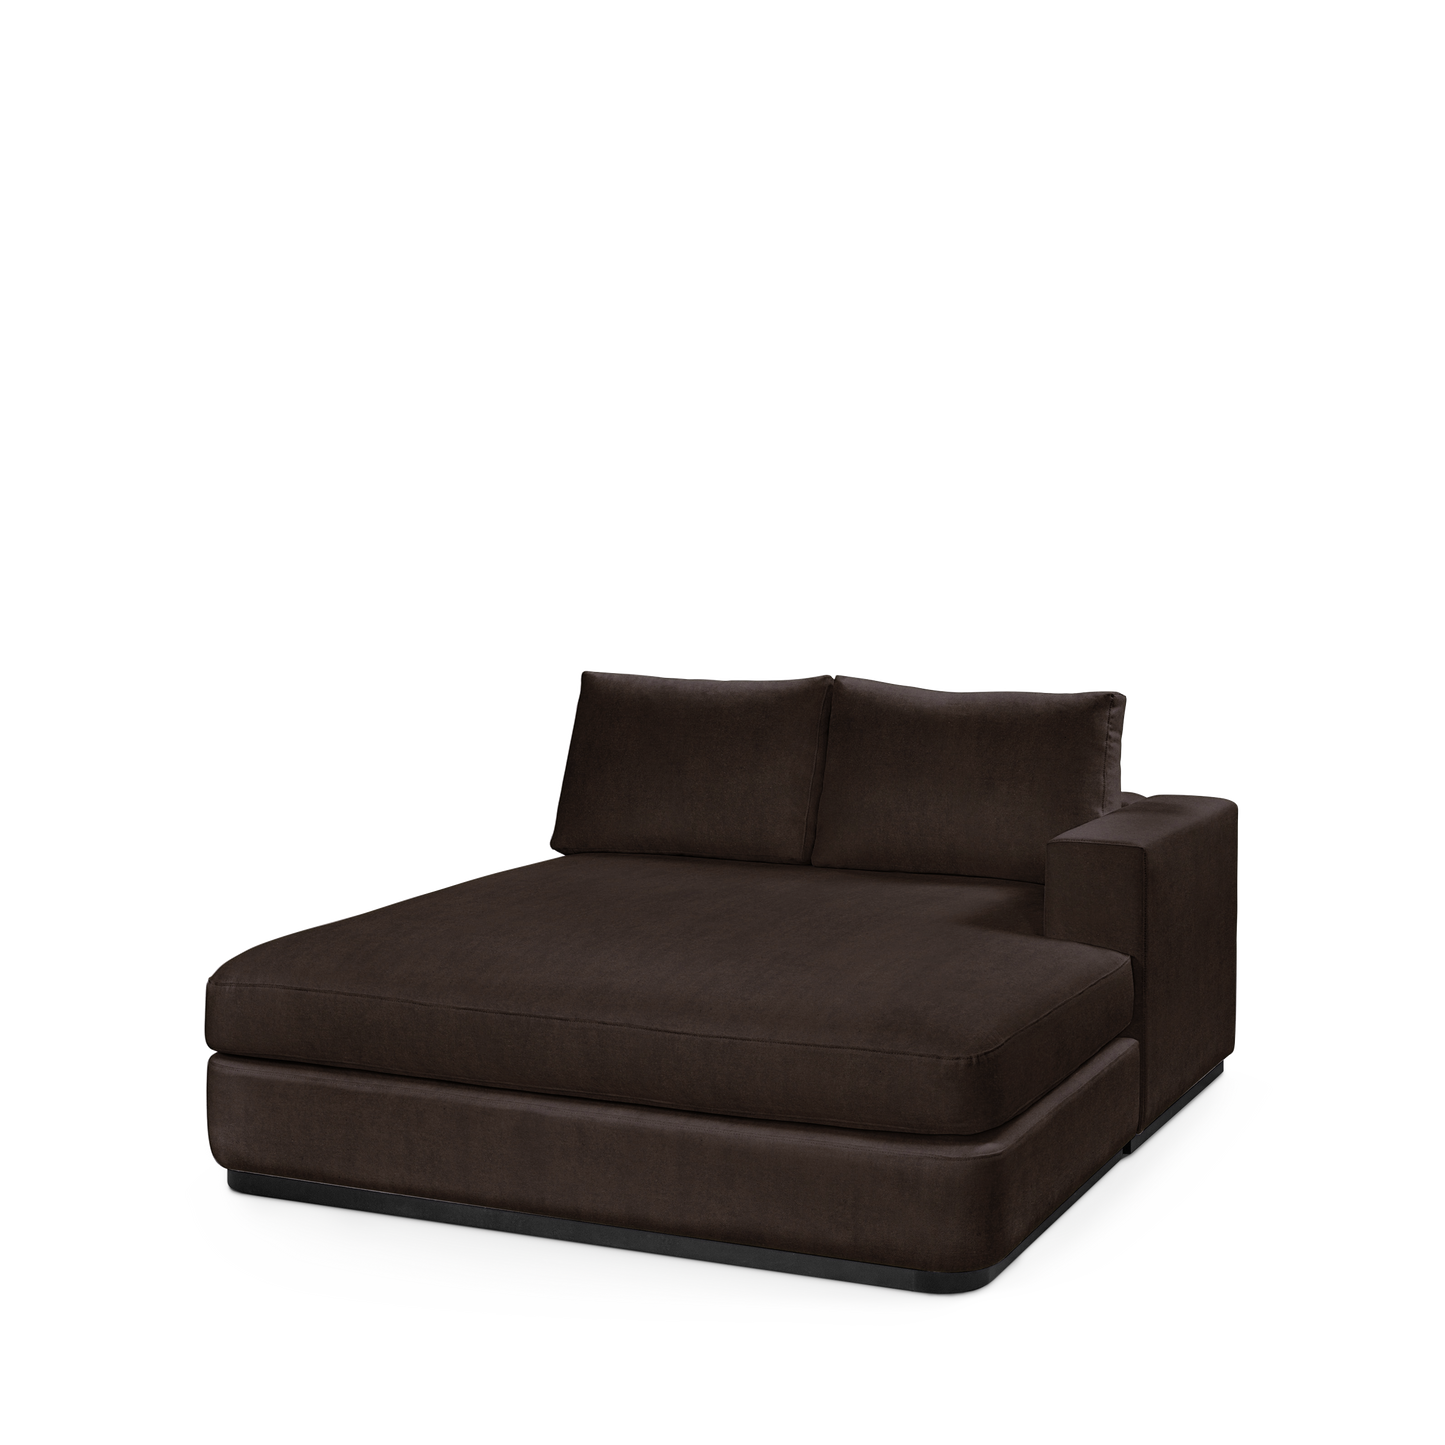 ATLAS 160 Lounge Bed arm rest right with dark brown textile